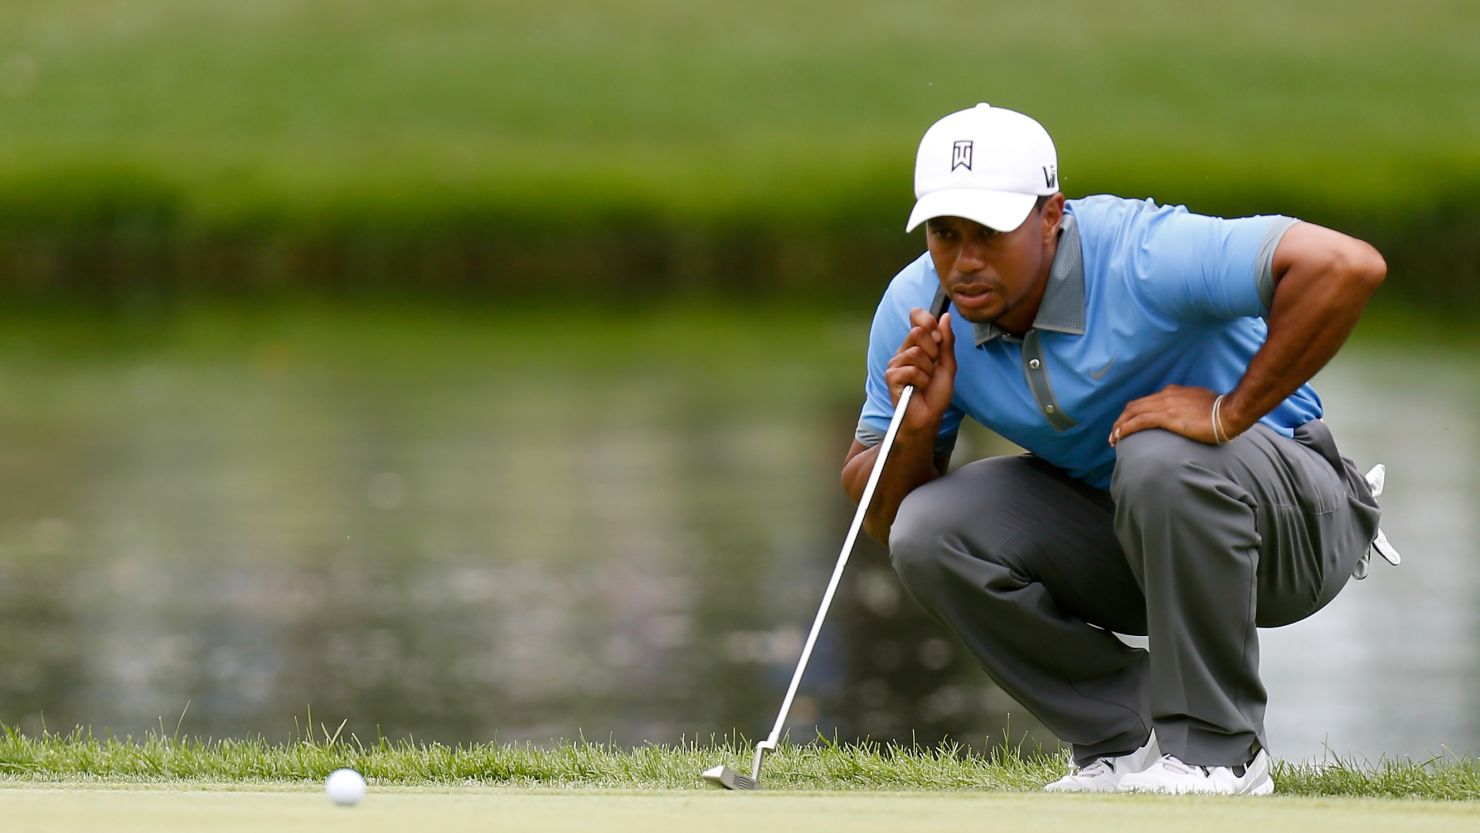 Tiger Woods lined up his shots with aplomb at the Bridgestone Invitational on Friday, shooting a sizzling 61. 